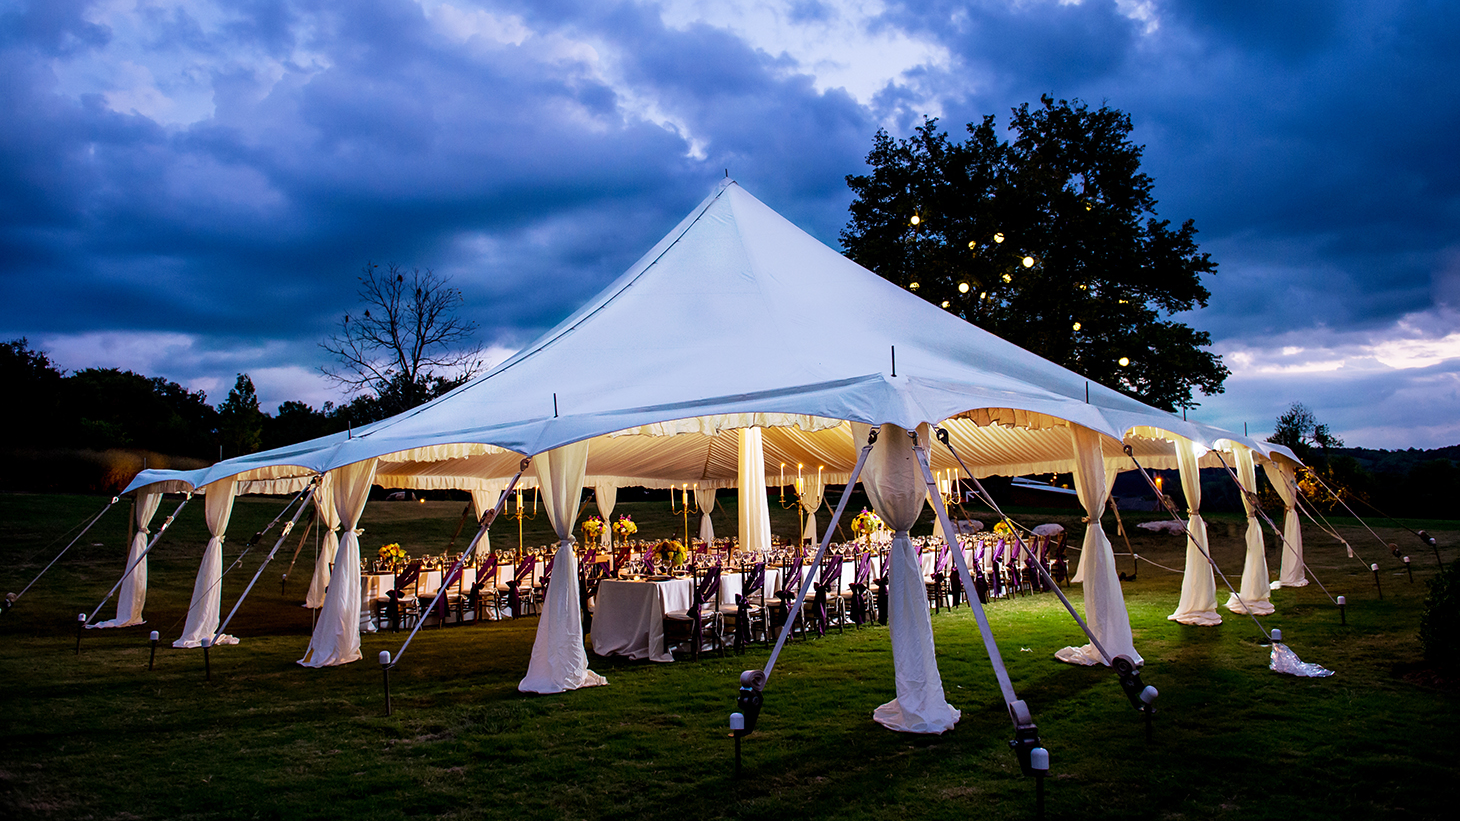 Planning An Outdoor Celebration?